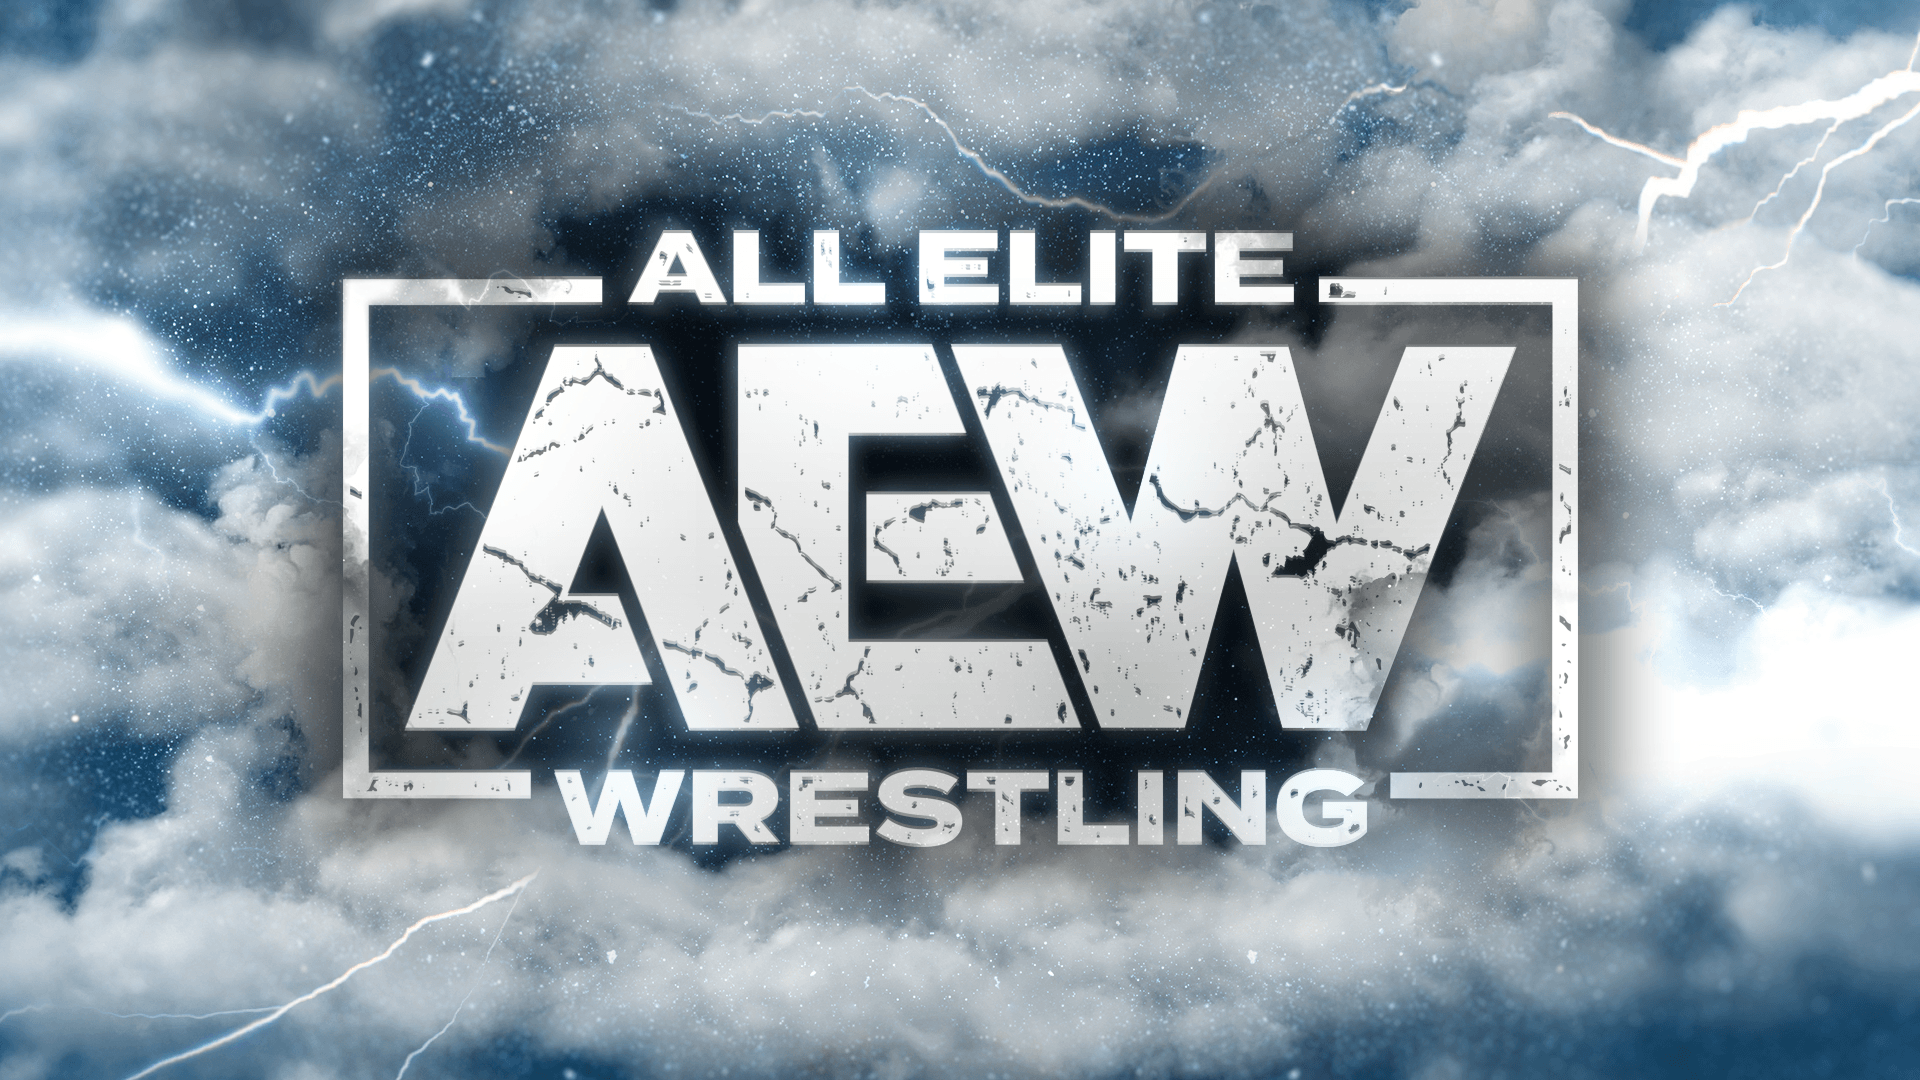 Another AEW wallpaper